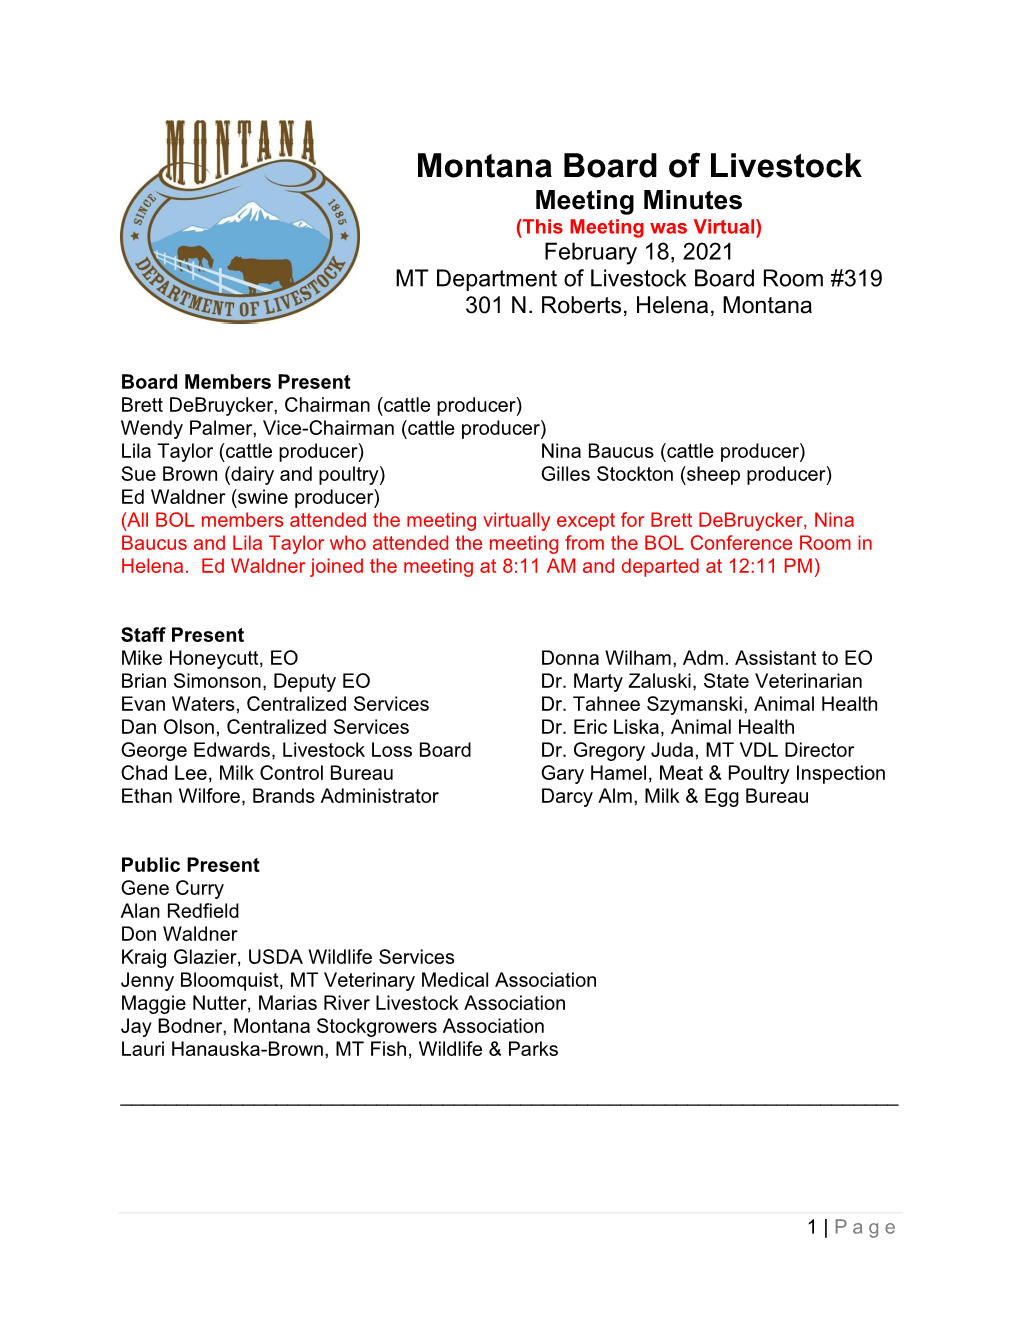 Montana Board of Livestock Meeting Minutes (This Meeting Was Virtual) February 18, 2021 MT Department of Livestock Board Room #319 301 N